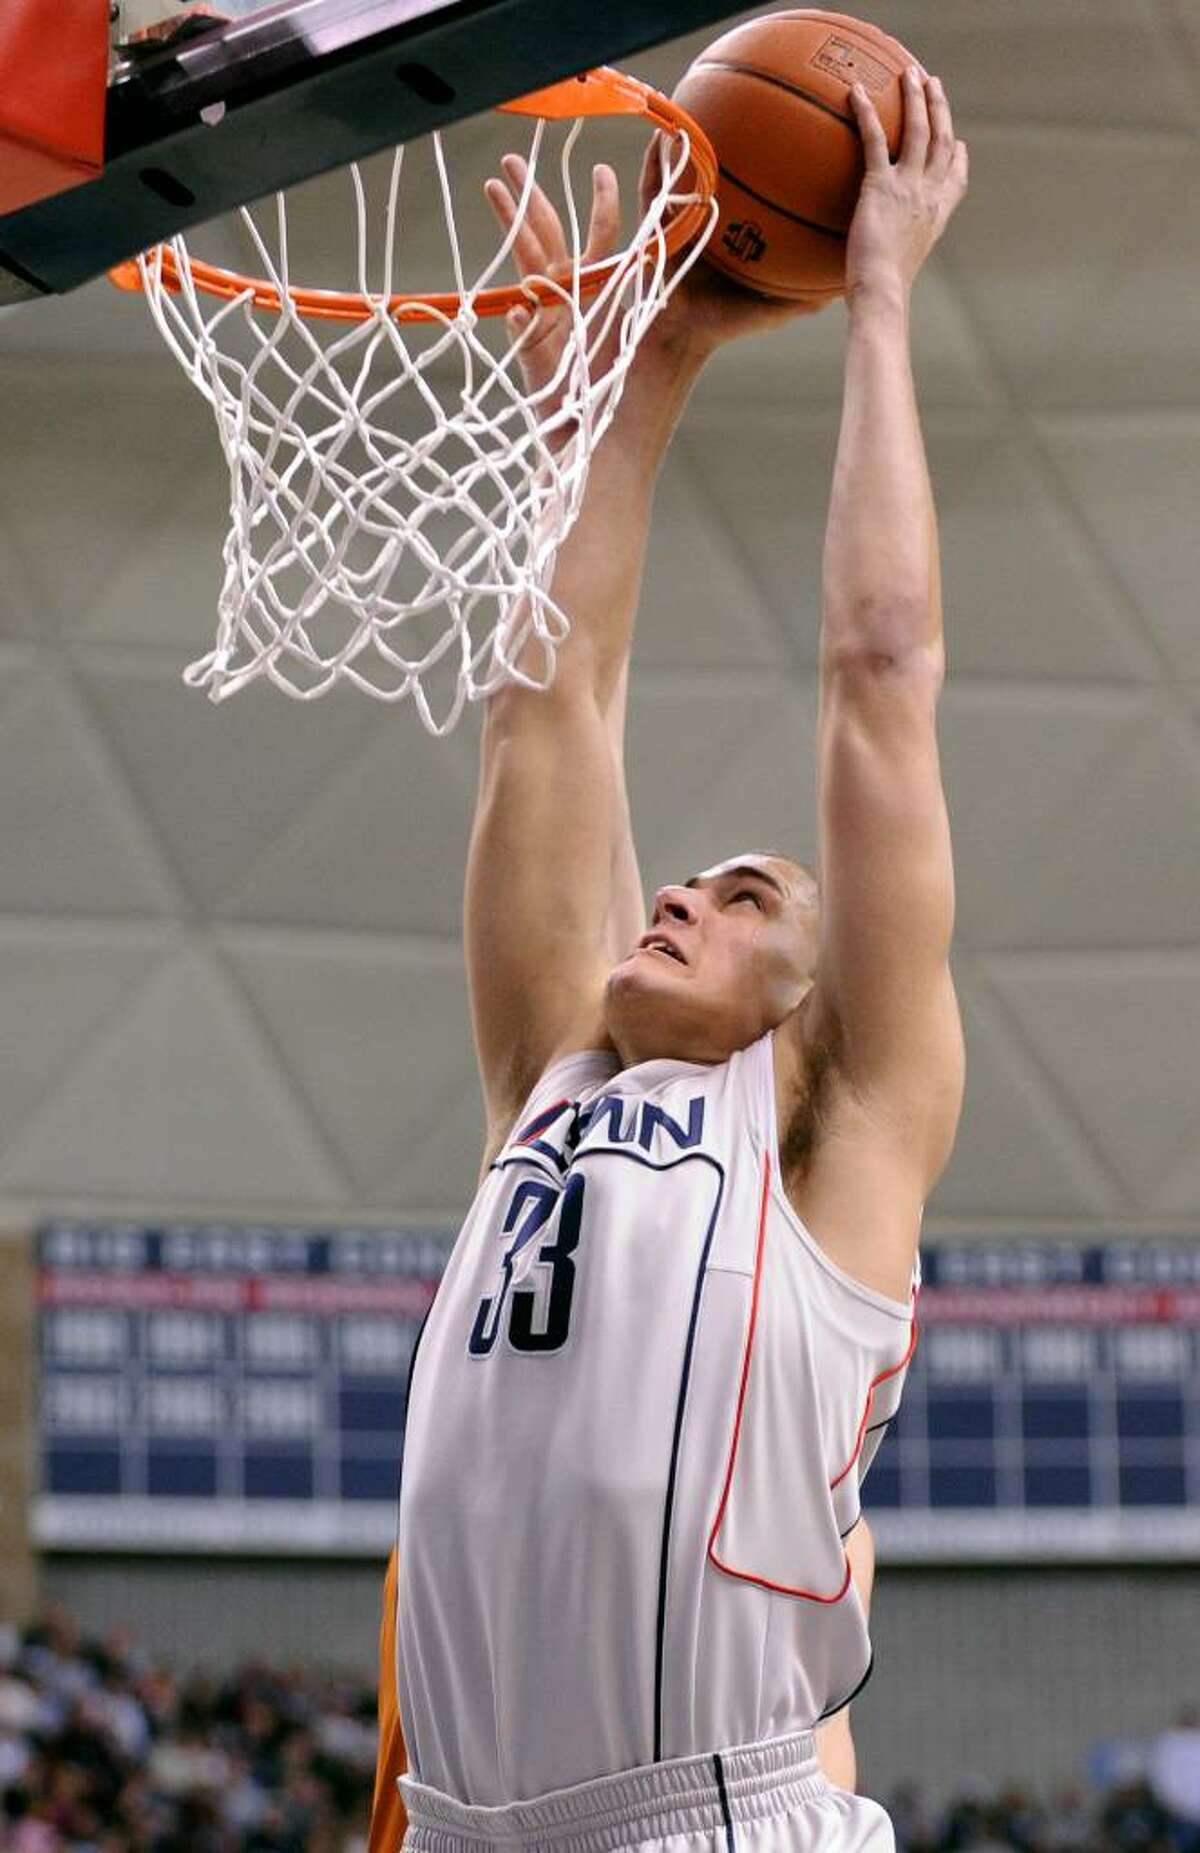 UConn's Gavin Edwards dunks the ball during the first half of Saturday's game against Texas at Gampel Pavilion.